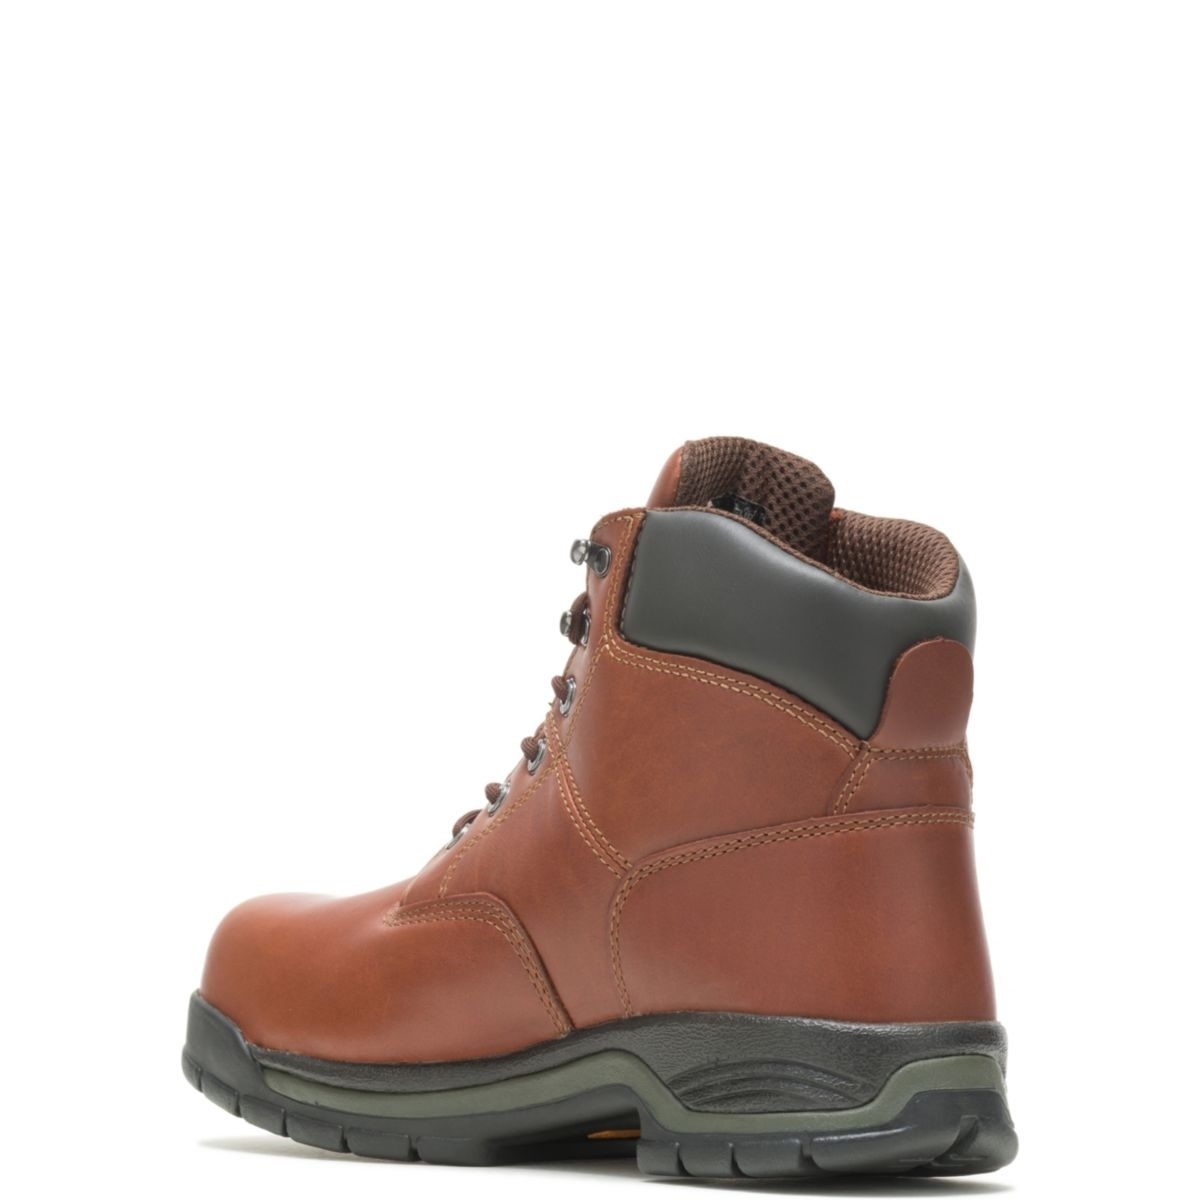 WOLVERINE Men's Harrison 6 Lace-Up Steel Toe Work Boot Brown - W04904 BROWN LEATHER - BROWN LEATHER, 10-4E